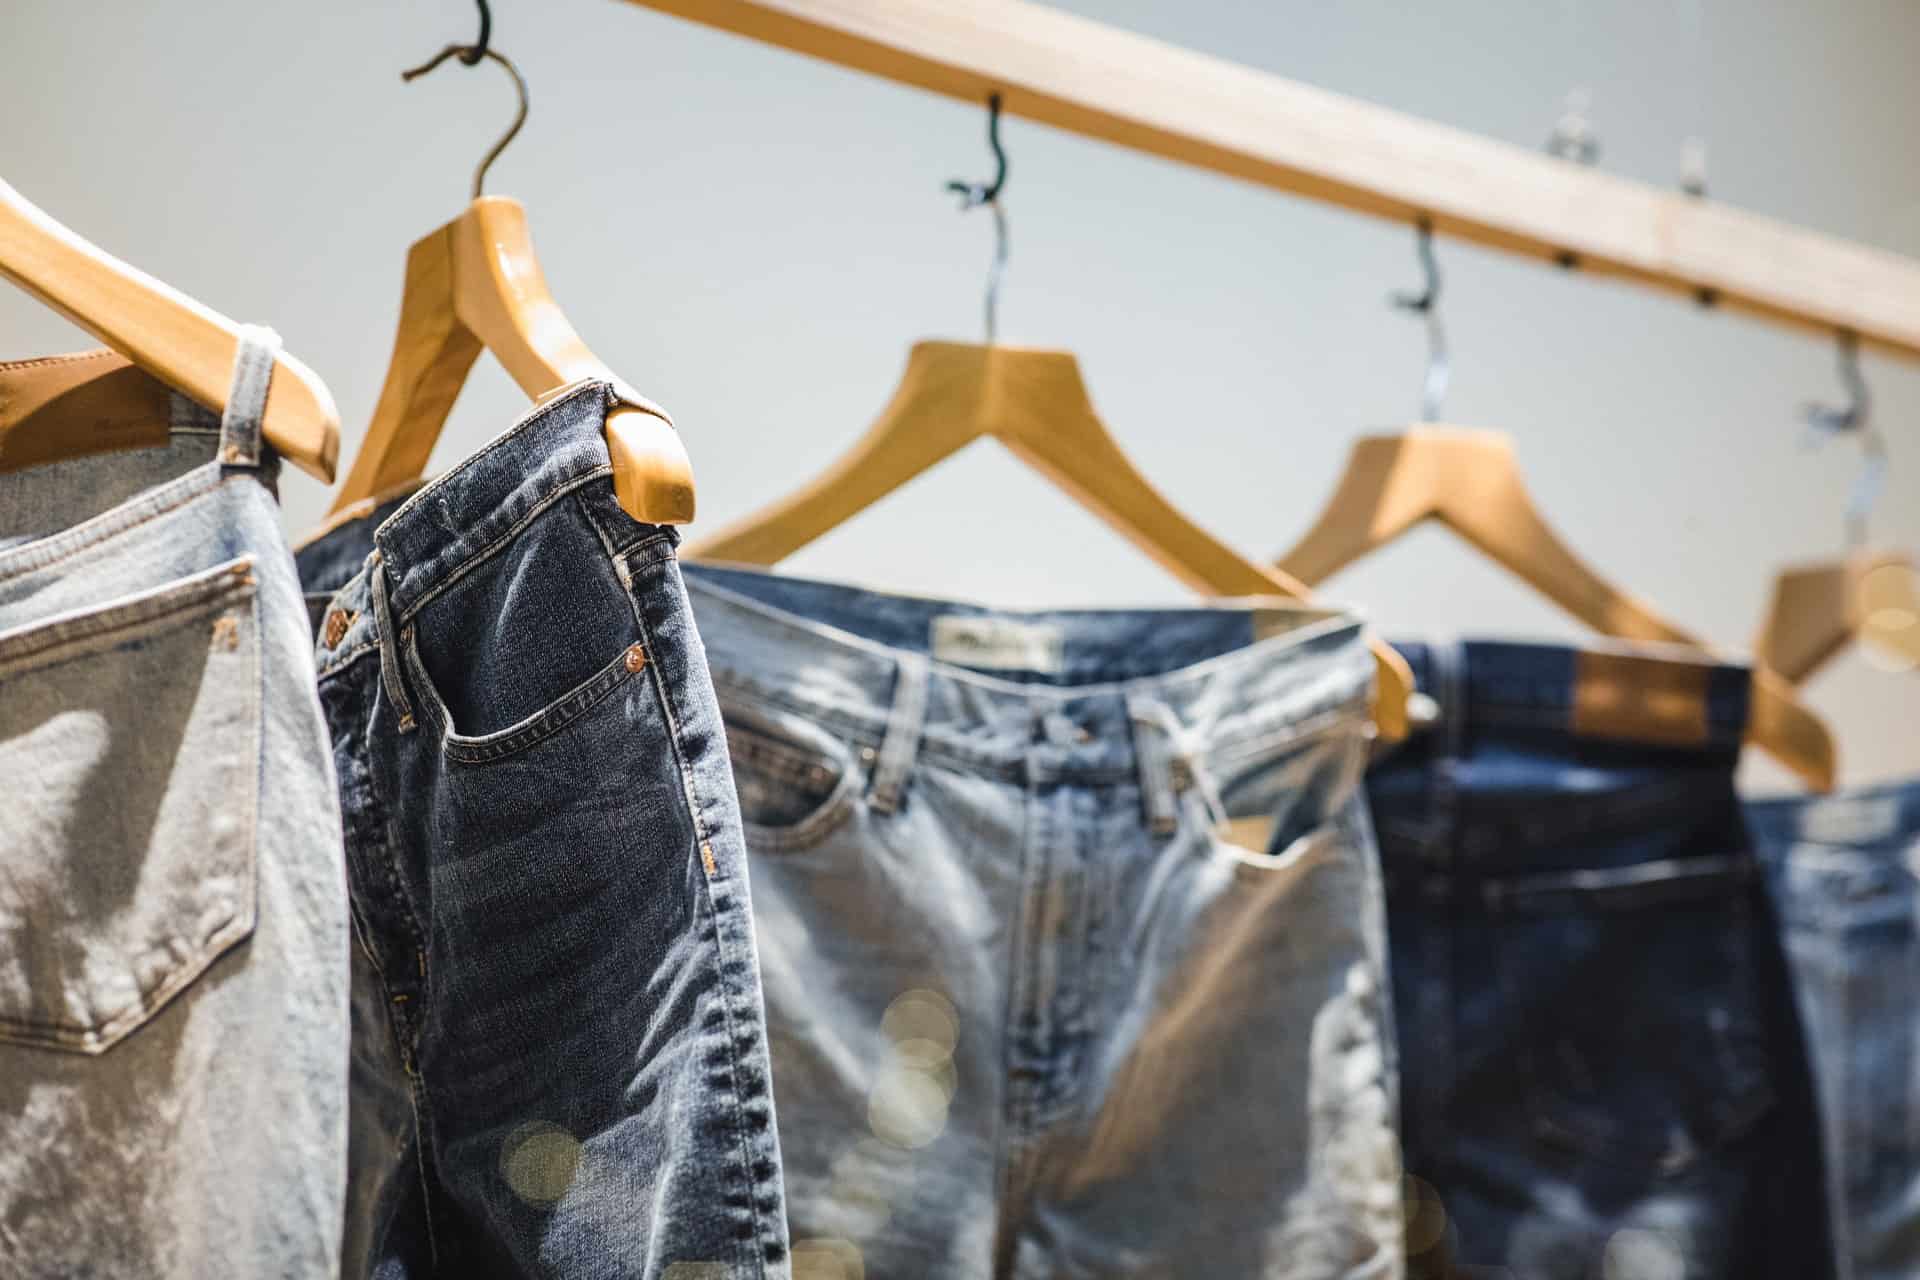 jeans hanging on rack